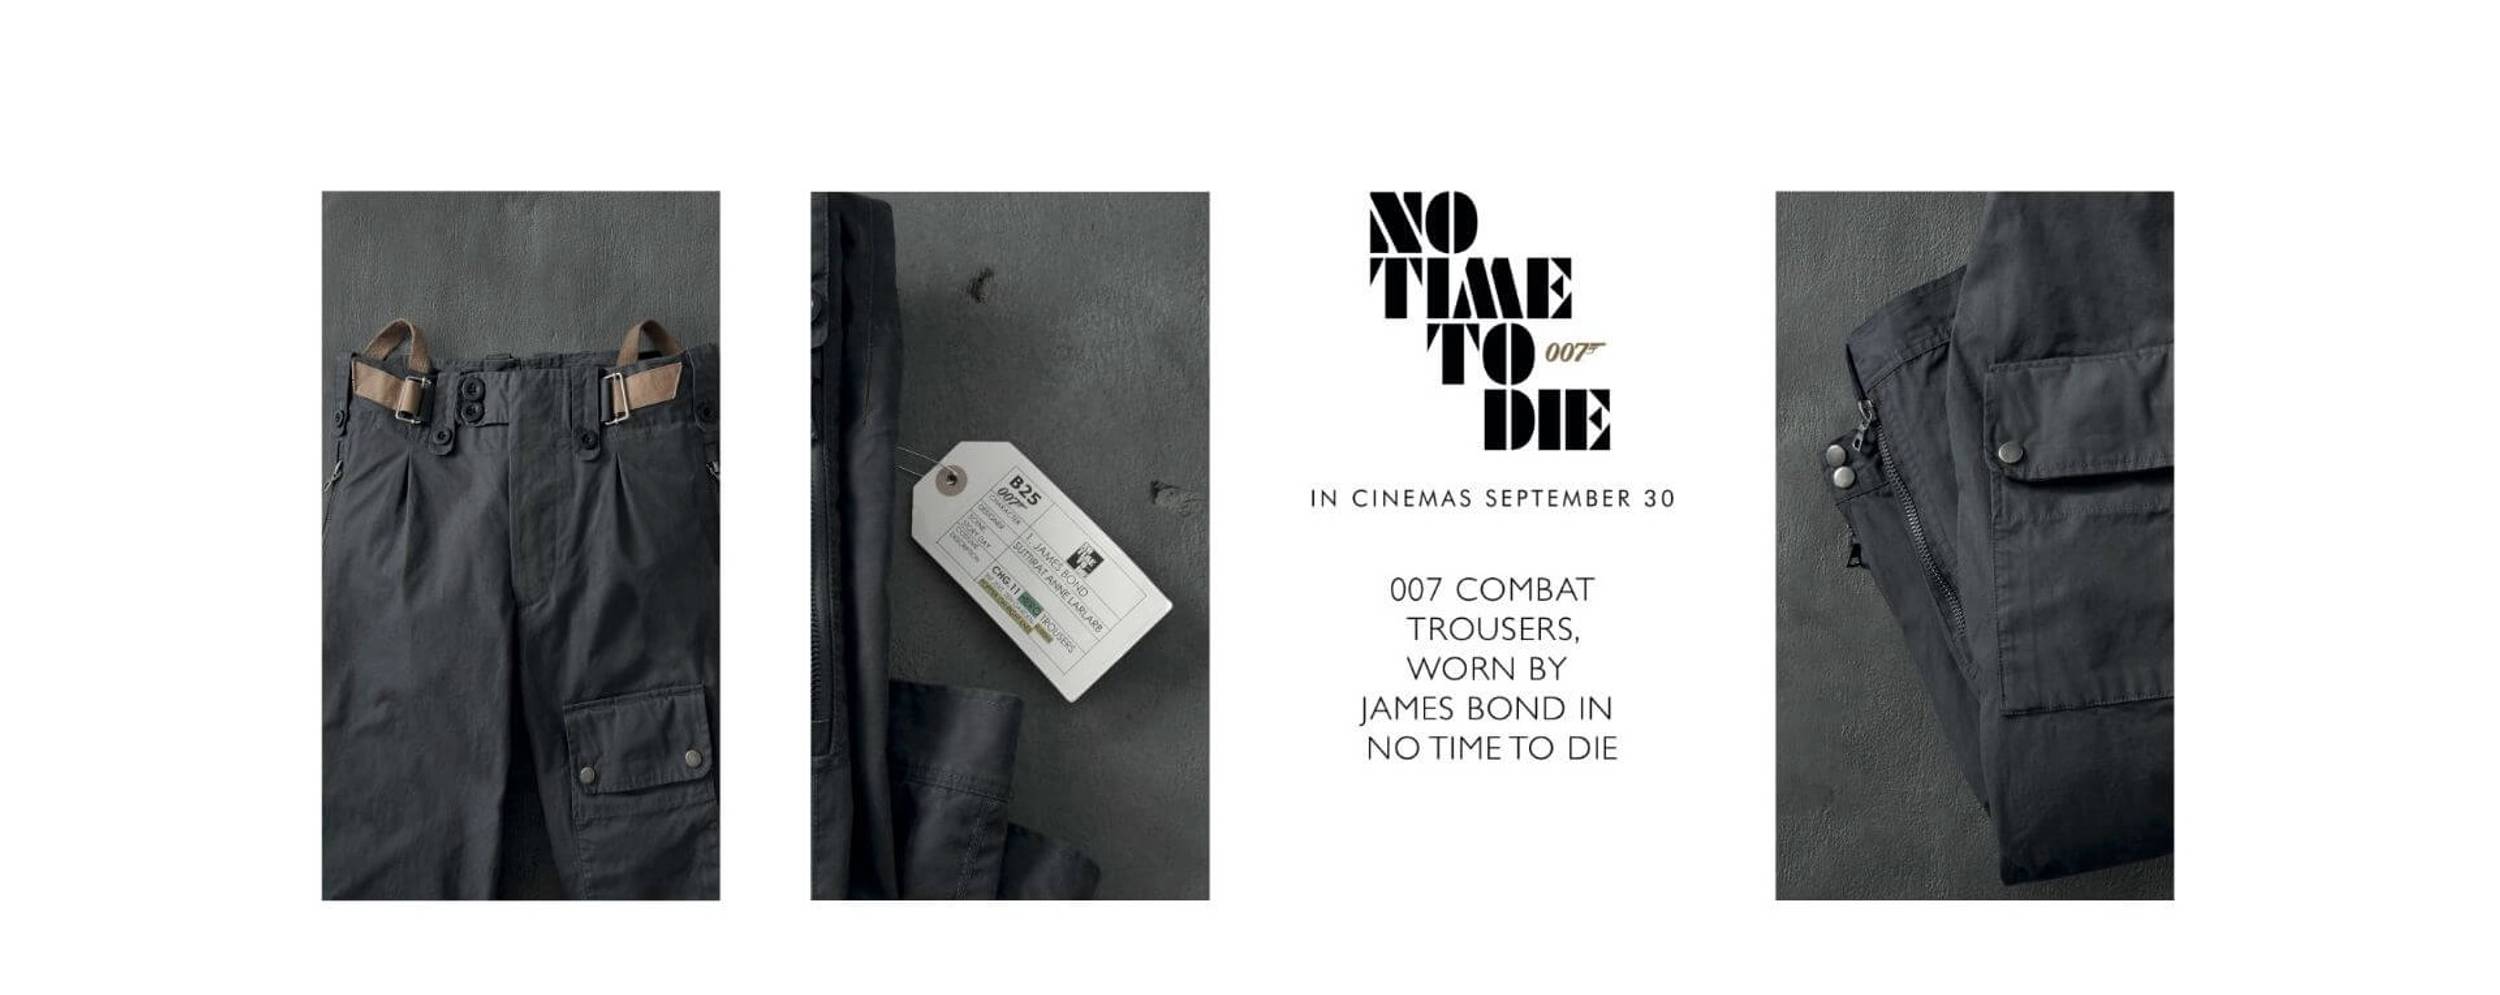 The Eagerly Awaited No Time To Die Combat Trouser